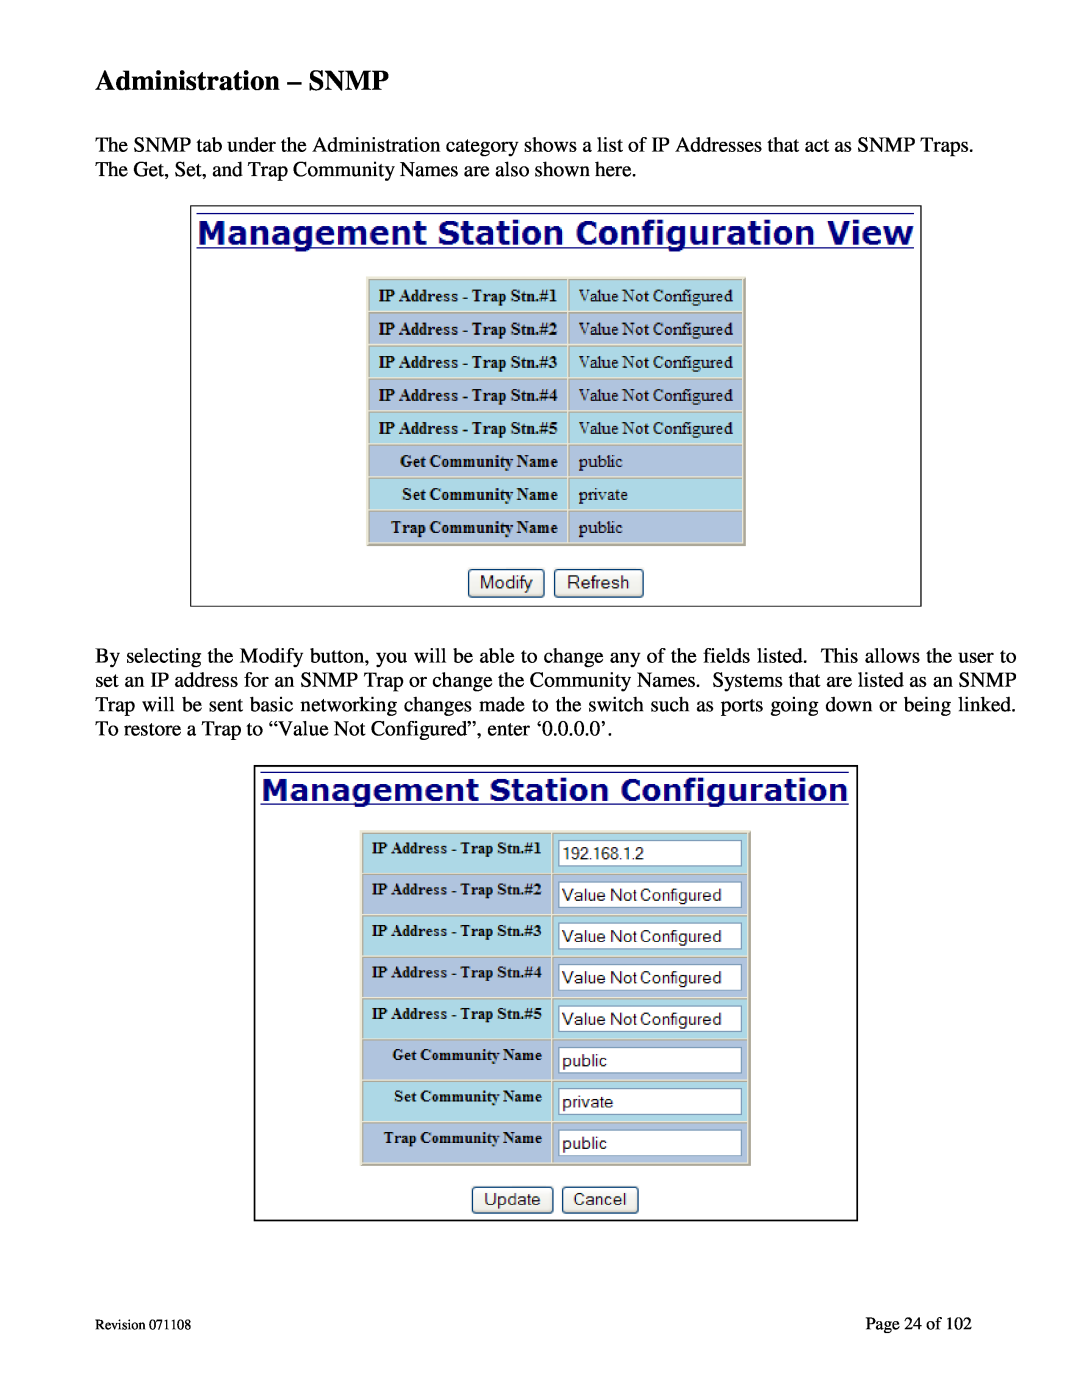 N-Tron 708M12 user manual Administration - SNMP, Page 24 of 